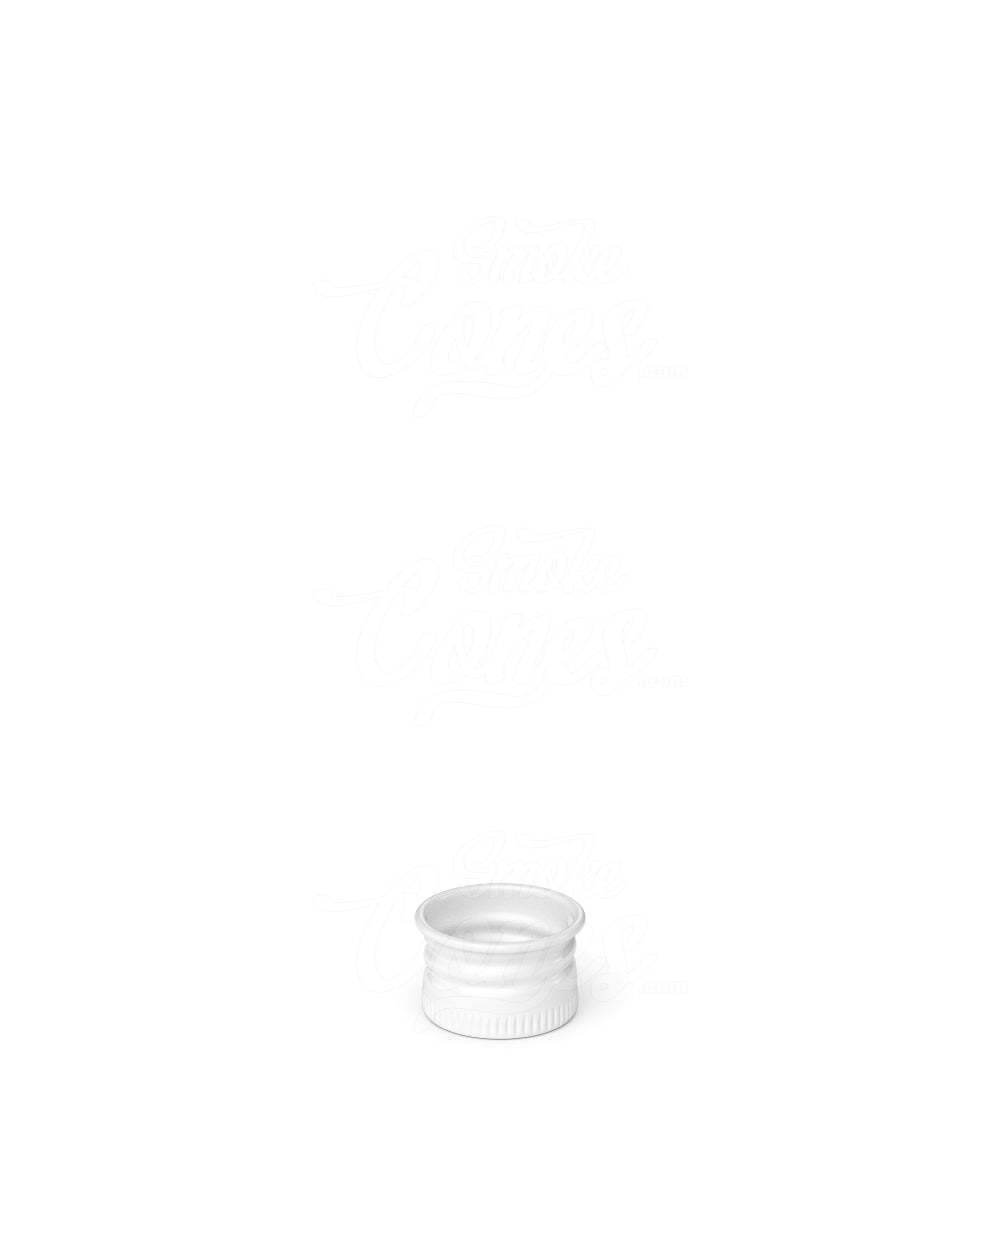 18mm Ribbed Screw Metal Caps With Foam Liner - Glossy White - 400/Box - 4